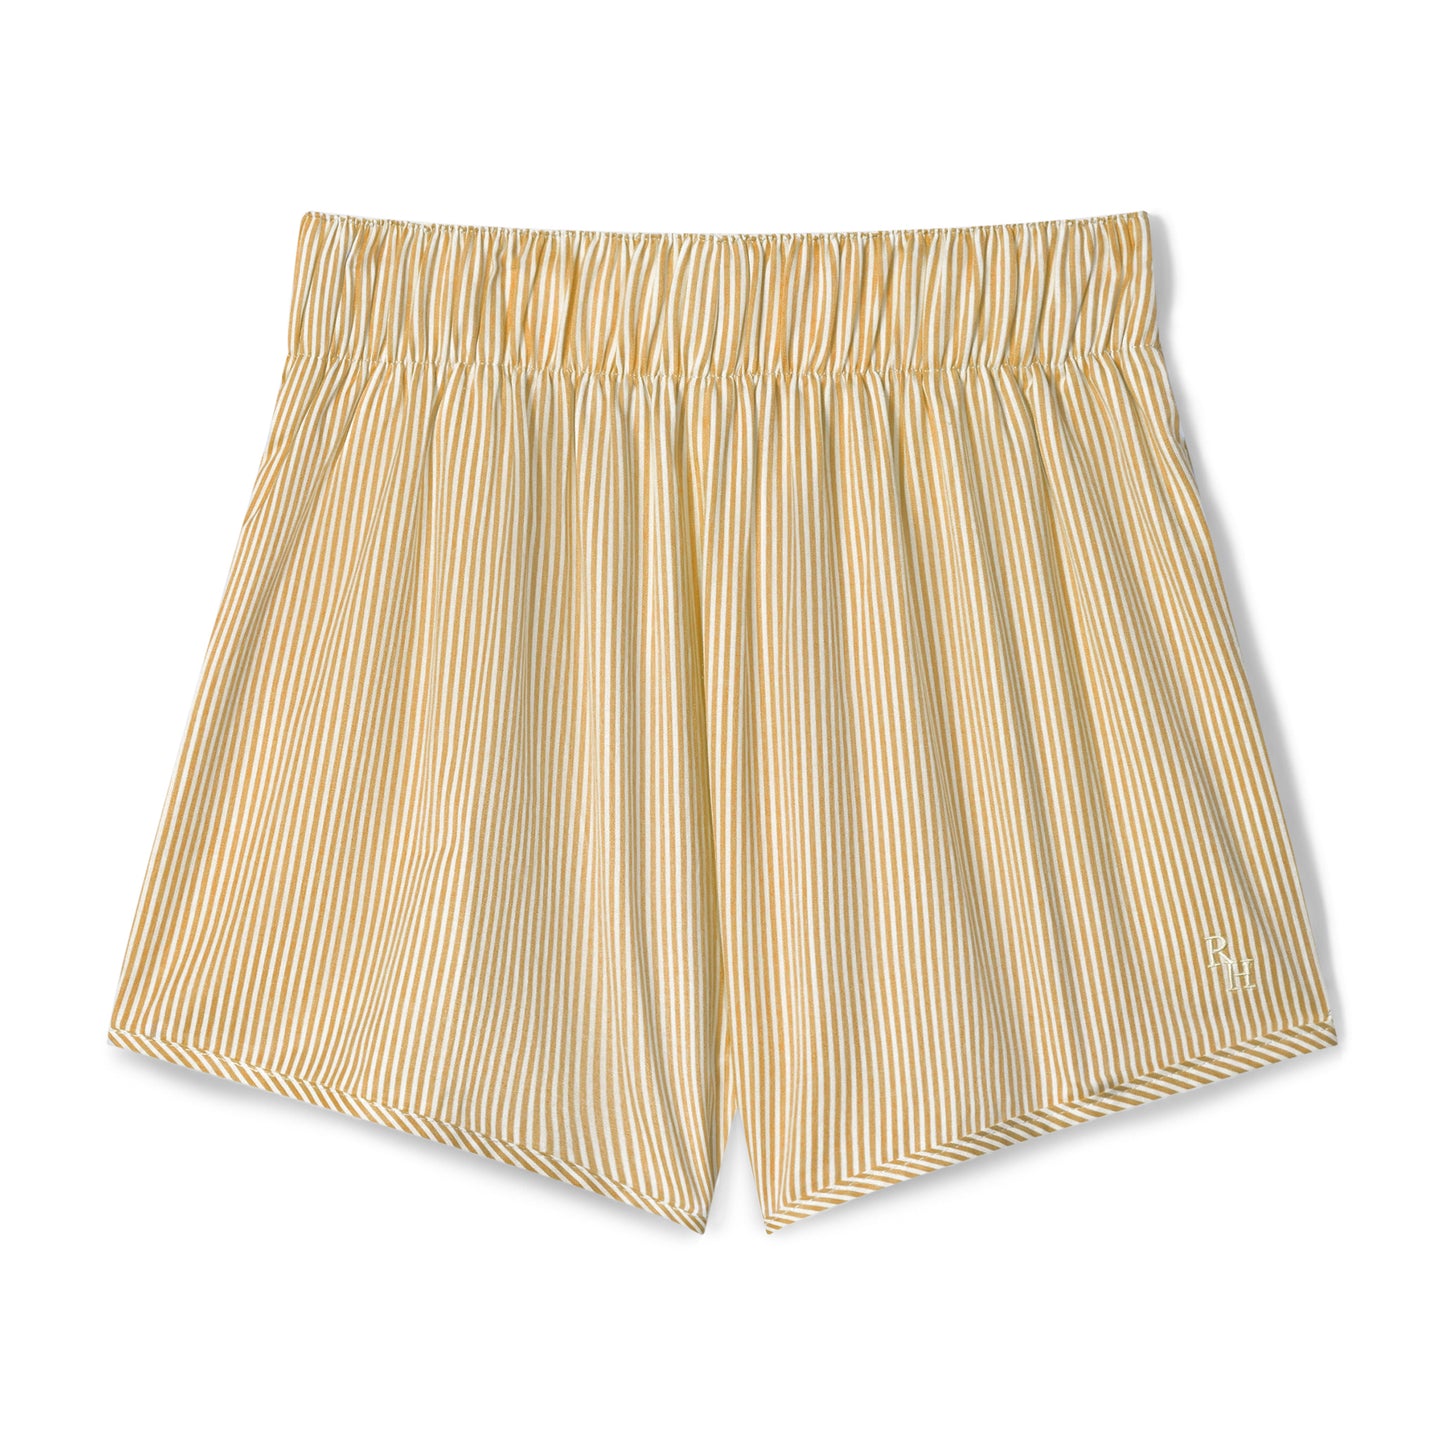 The Ferry Short in Faded Yellow